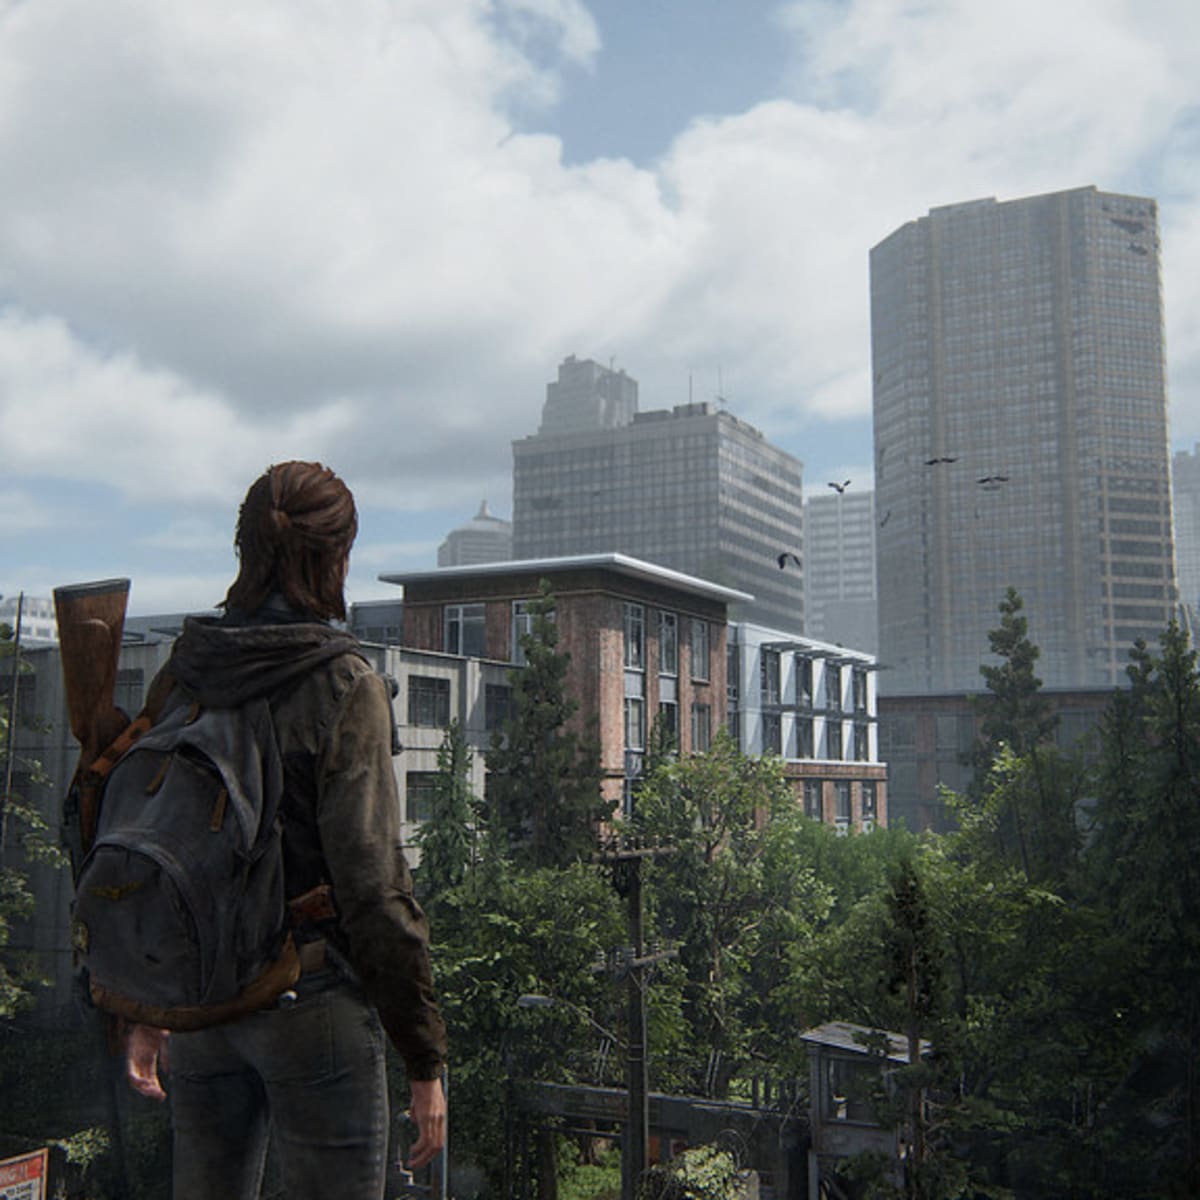 When will The Last of Us Part 2 come to PC? Release date speculation